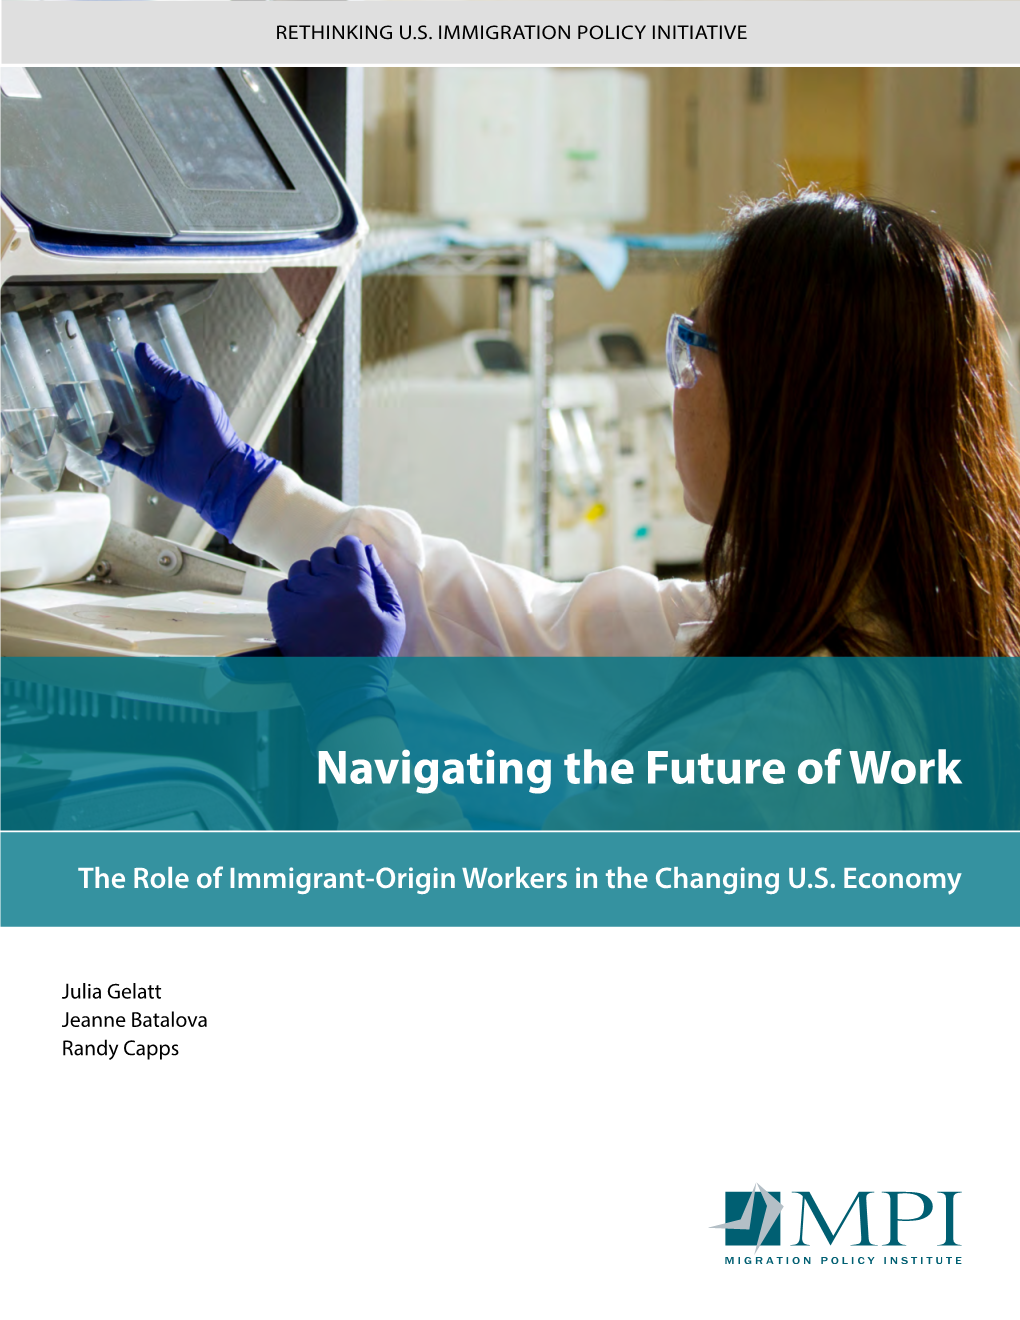 Navigating the Future of Work: the Role of Immigrant-Origin Workers in the Changing U.S